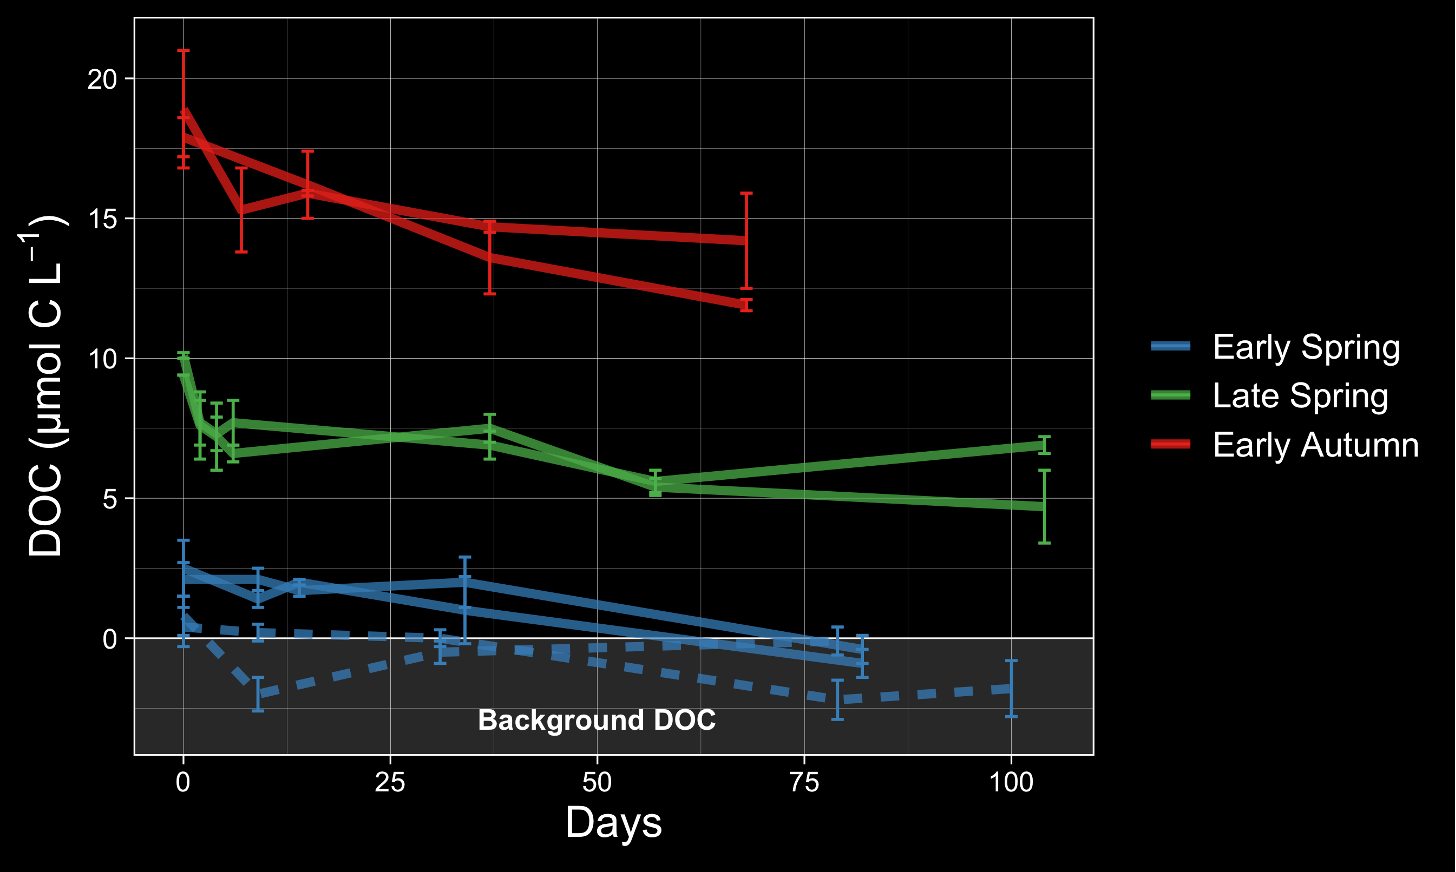 DOC remineralization by heterotrophic bacteria over weeks to months assessed using seawater incubation experiments. These experiments provided and idea of how much DOC can escape microbial remineralization to potentially be exported and how that differs over seasons.